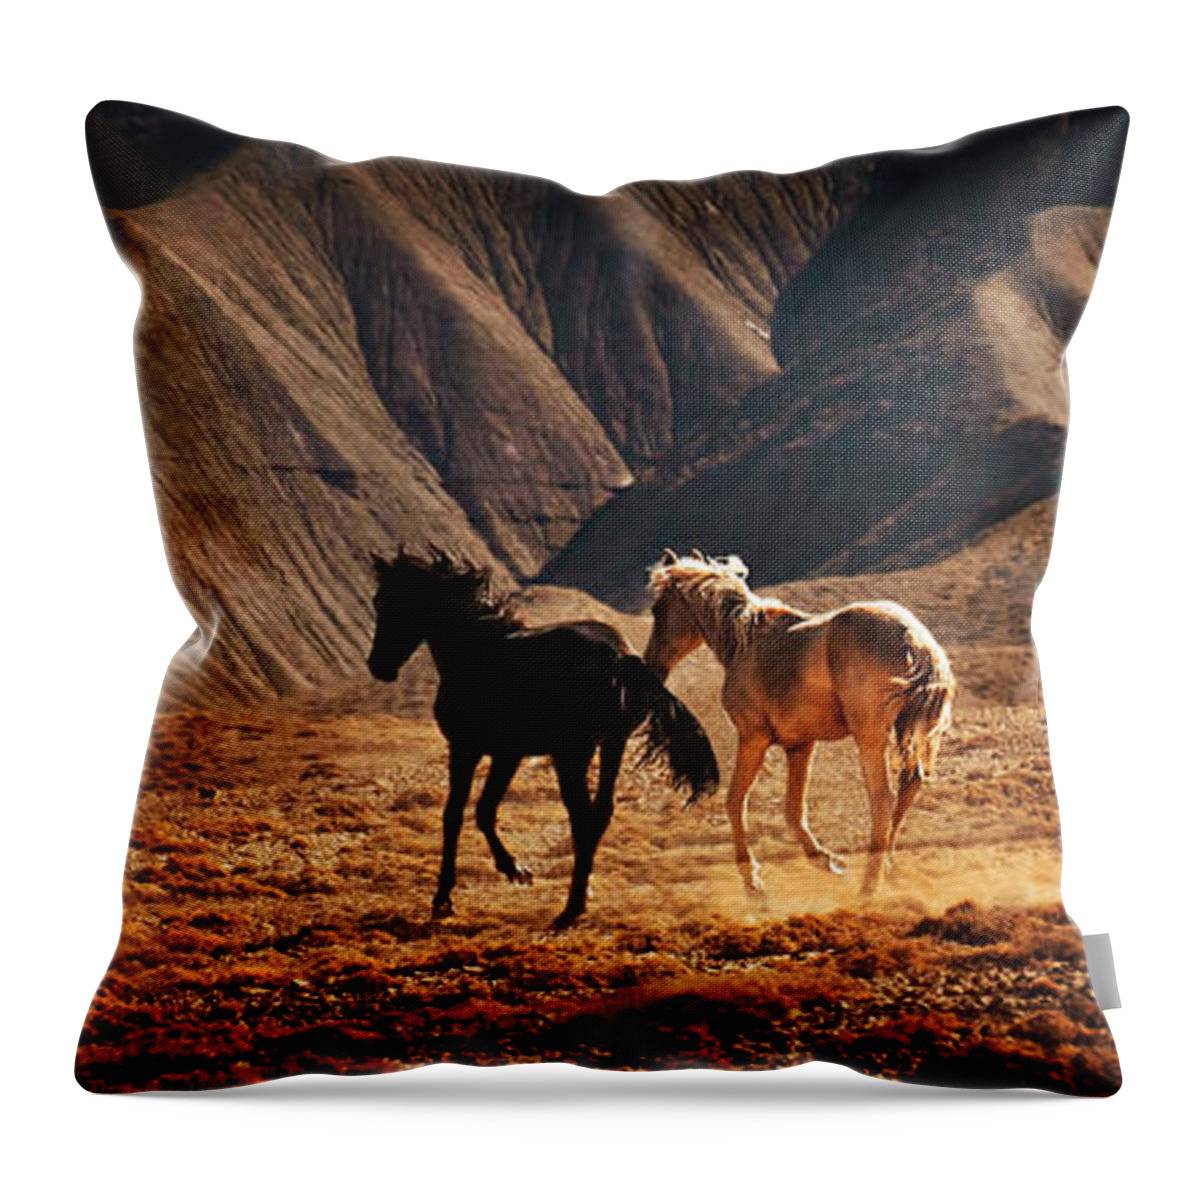 Wild Horses Throw Pillow featuring the photograph Running Free by Priscilla Burgers